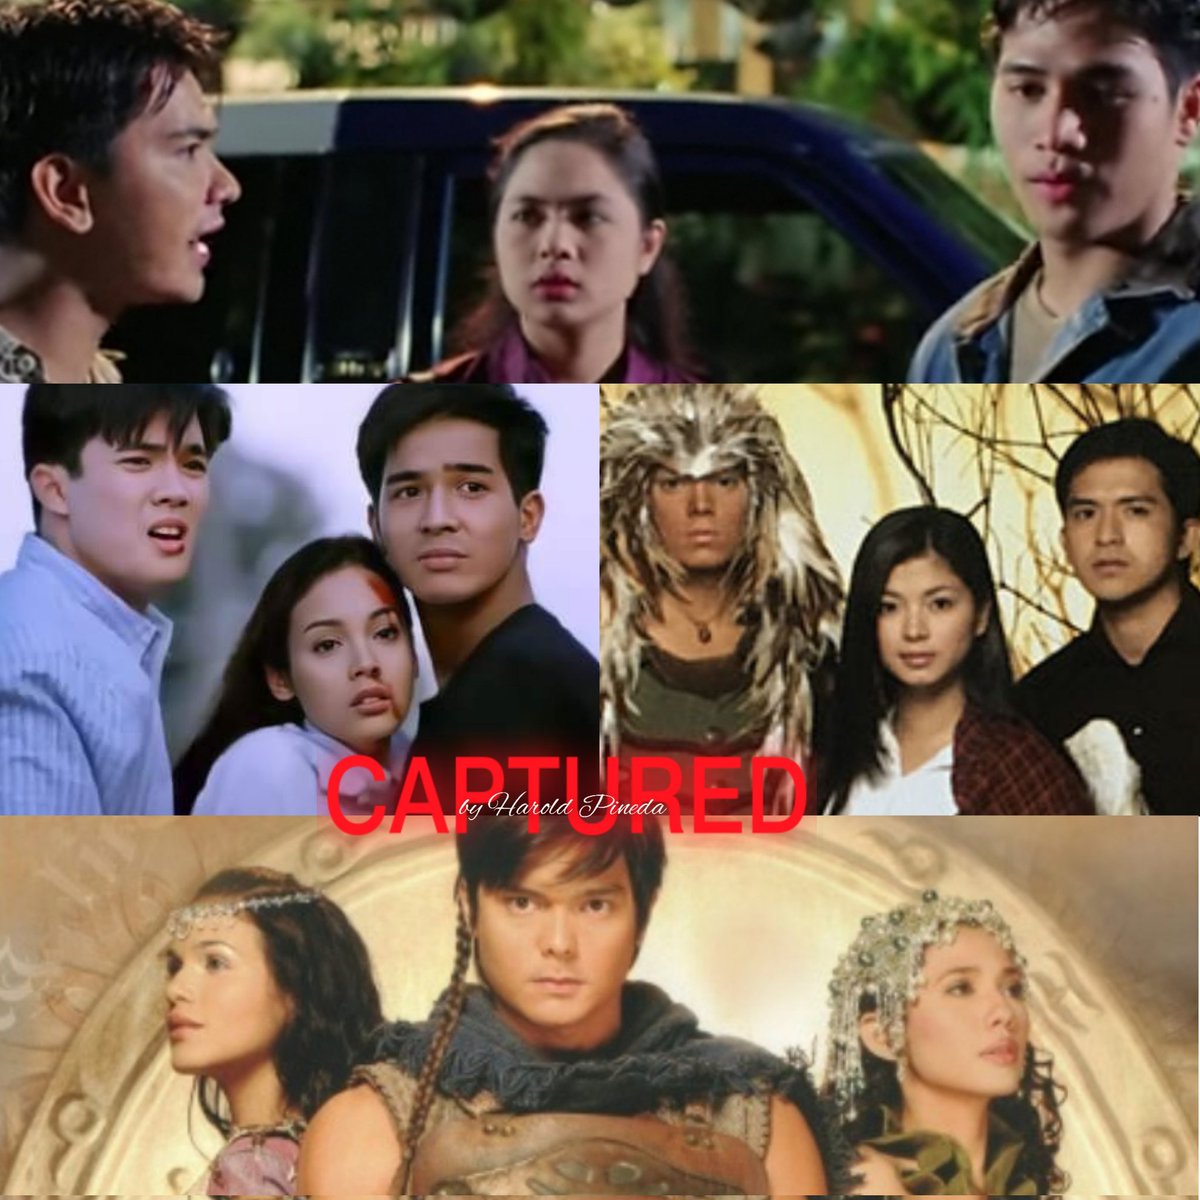 Four of the most iconic love triangles on Philippine TV history. 

1. #ClaudineBarretto, #RicoYan and #DietherOcampo
2. #JudyAnnSantos, #WowieDeGuzman and #PioloPascual
3. #AngelLocsin, #RichardGutierrez and #DennisTrillo
4. #IzaCalzado, #DingdongDantes and #Karylle